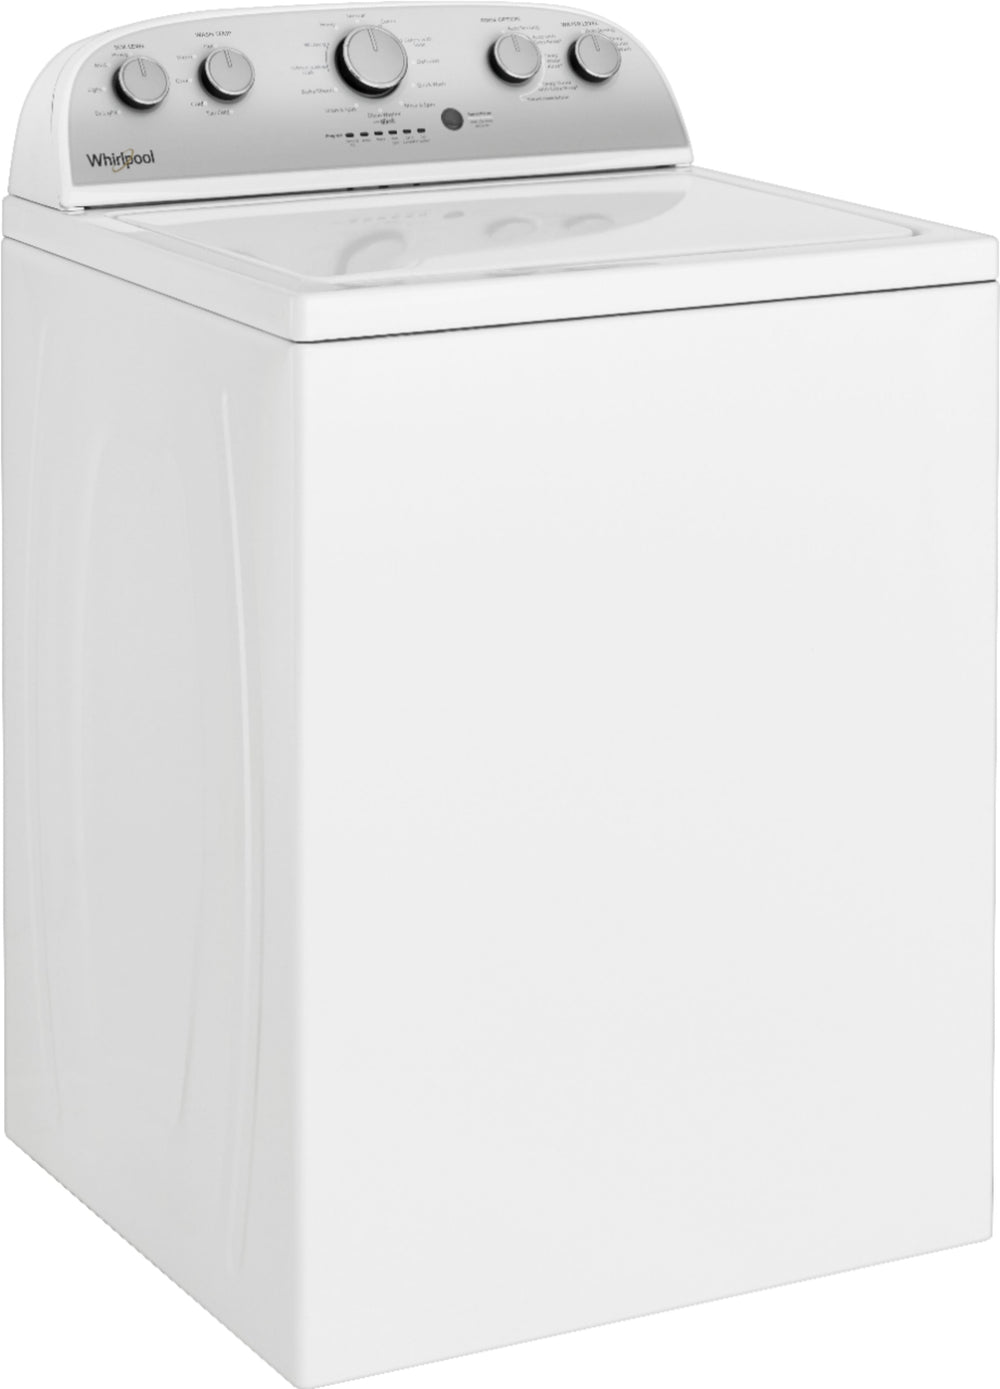 Whirlpool - 3.8 Cu. Ft. High Efficiency Top Load Washer with 360 Wash Agitator - White_1